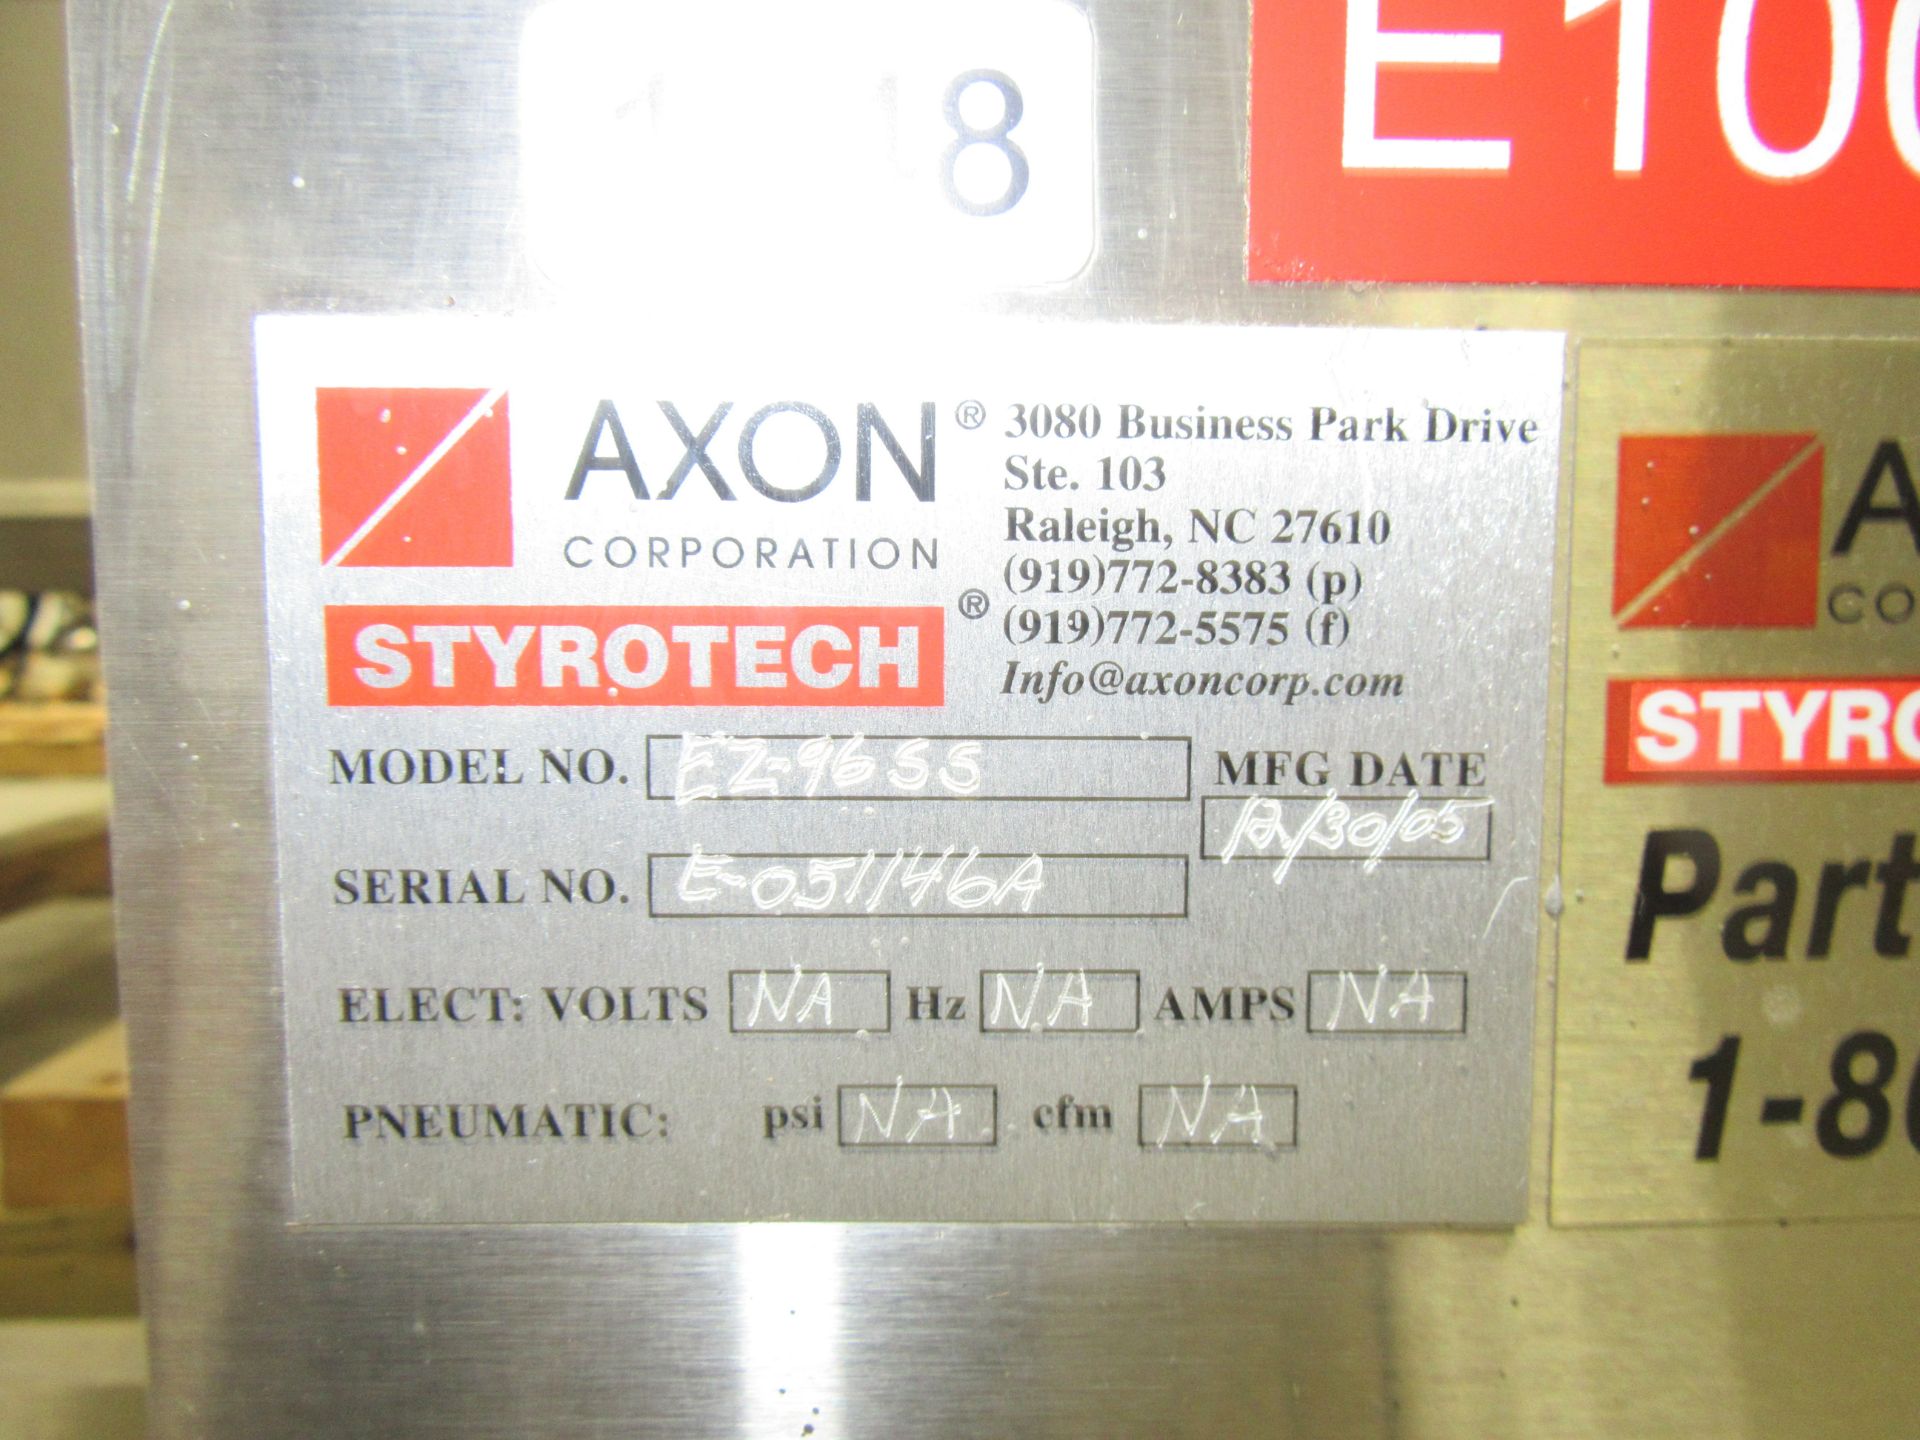 Axon steam tunnel system - Image 5 of 5